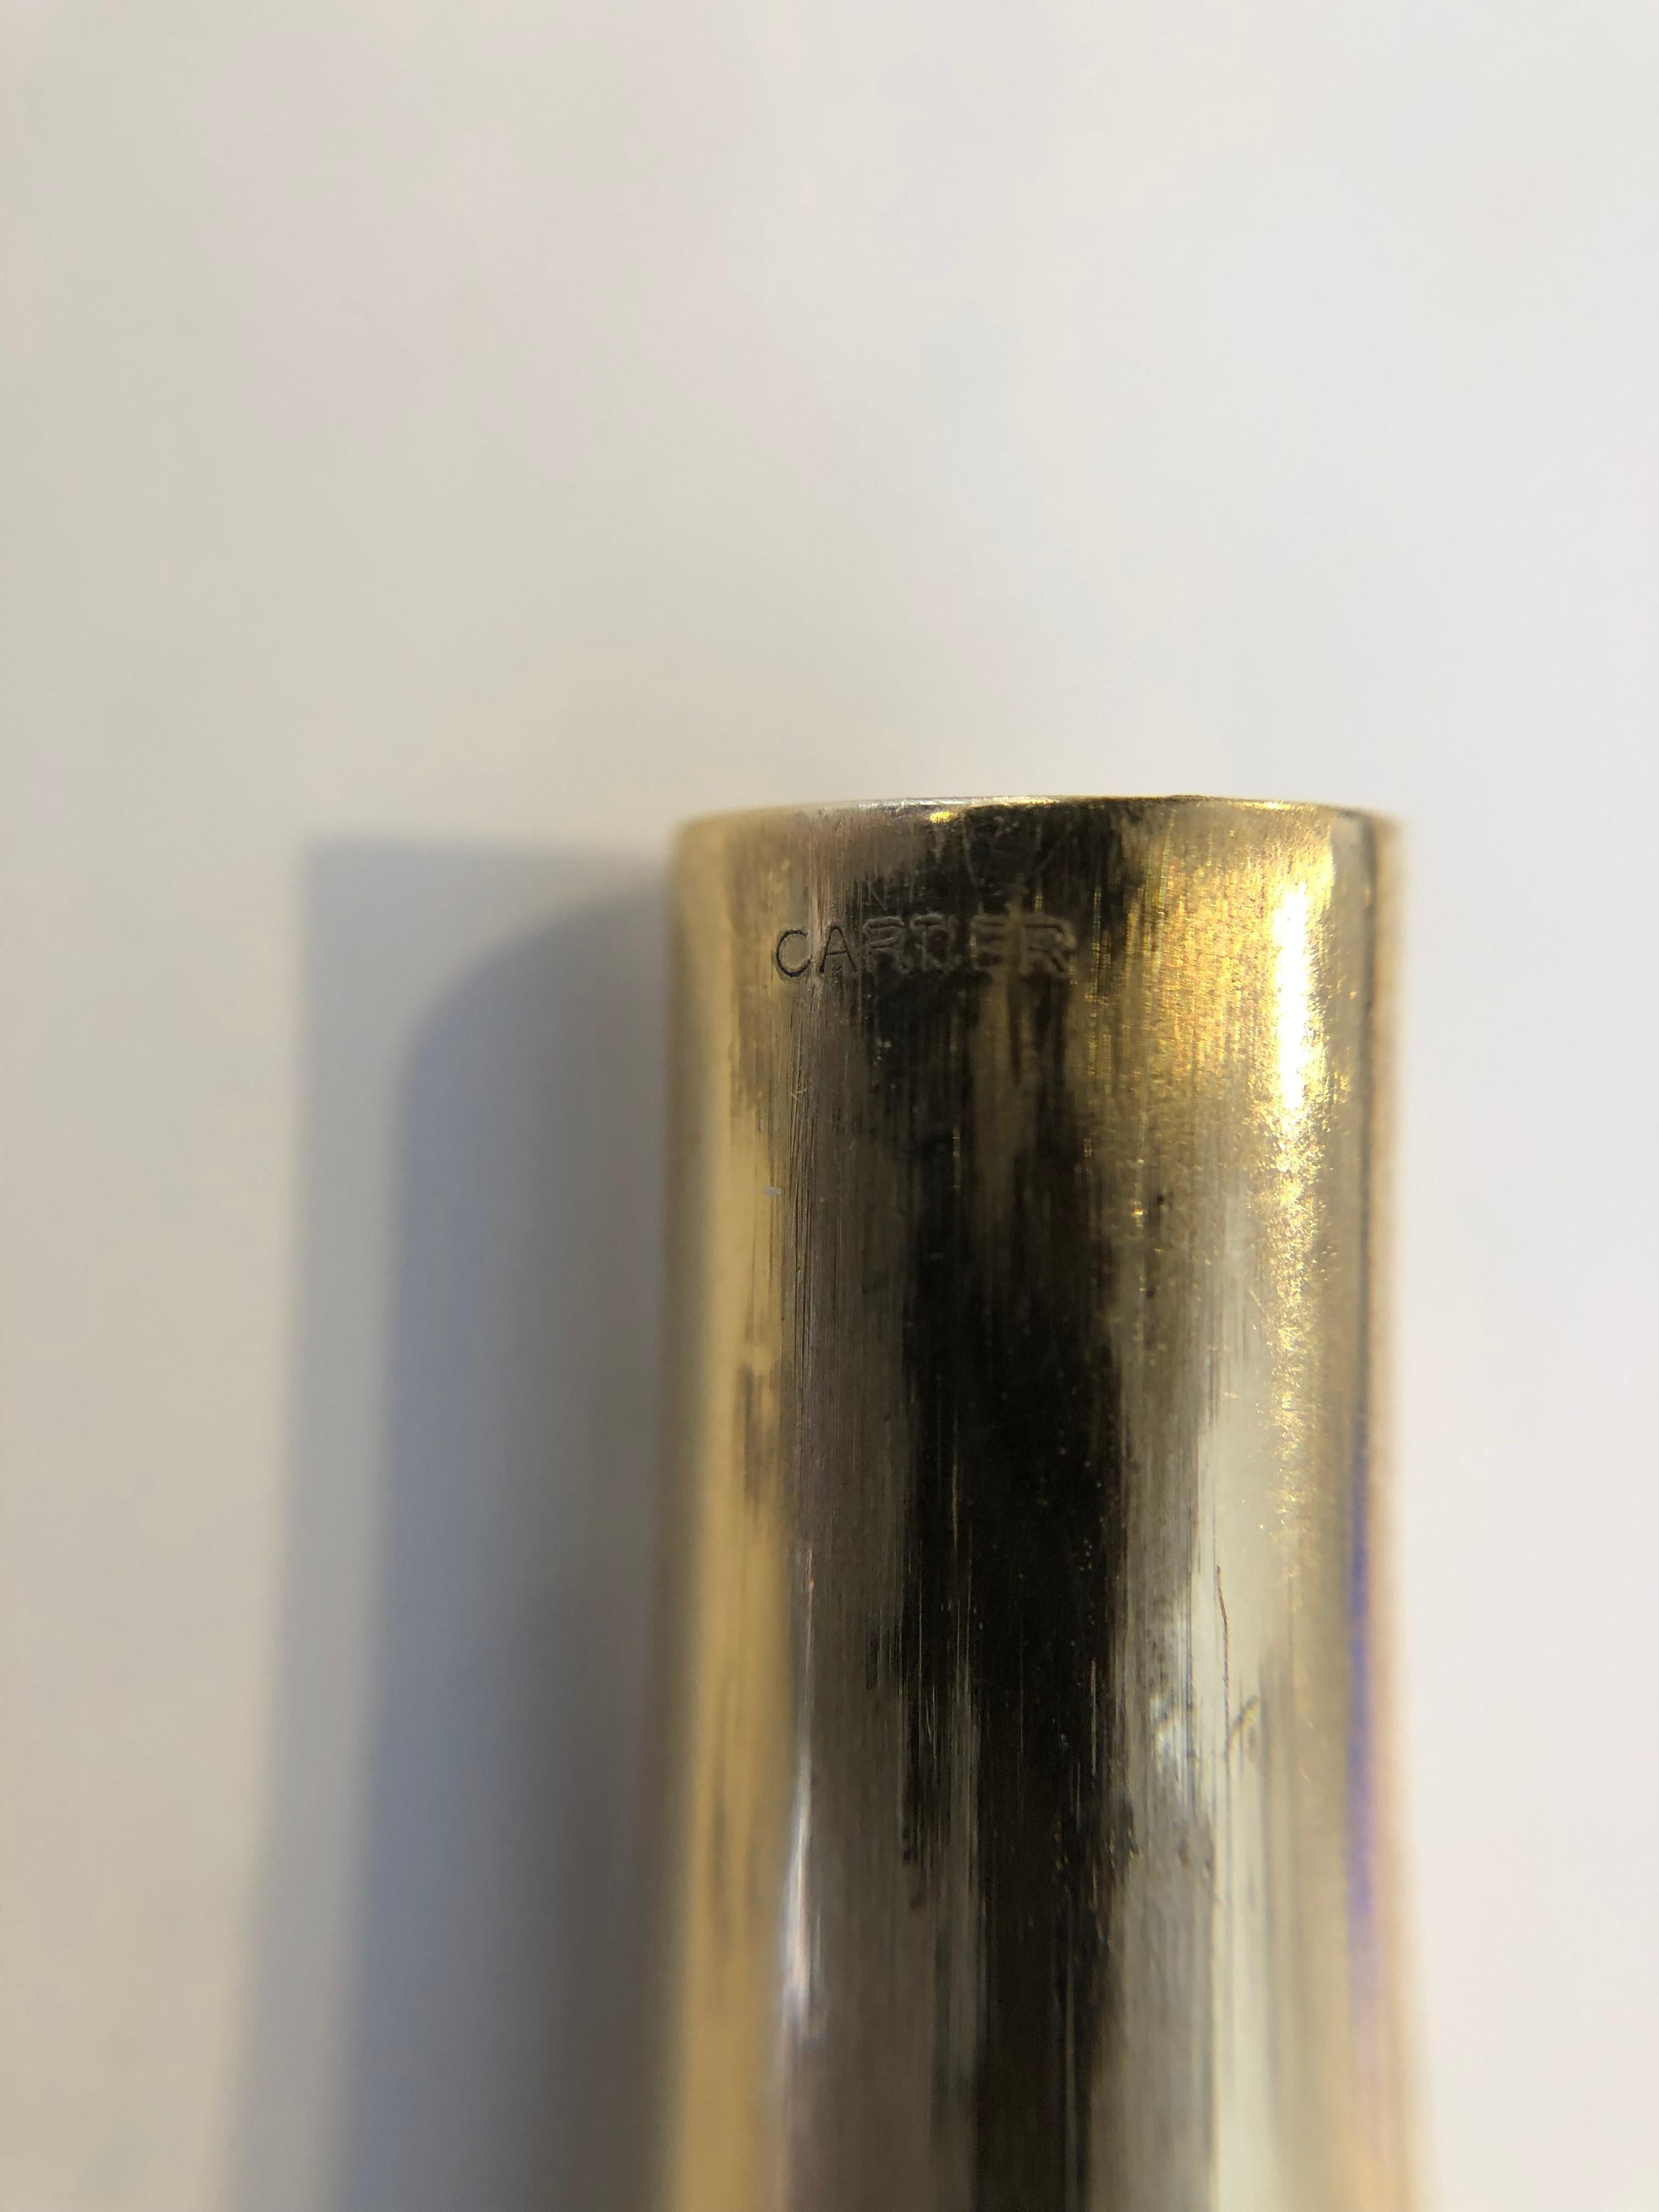 Art Deco Cartier Enamel Lipstick Holder in 18 Carat Yellow Gold
A 1920's Cartier gold and enamel lipstick holder. The piece is signed Cartier together with makers and assay marks.
Weight 16.2 grams
Length 5cm
Free shipping included
